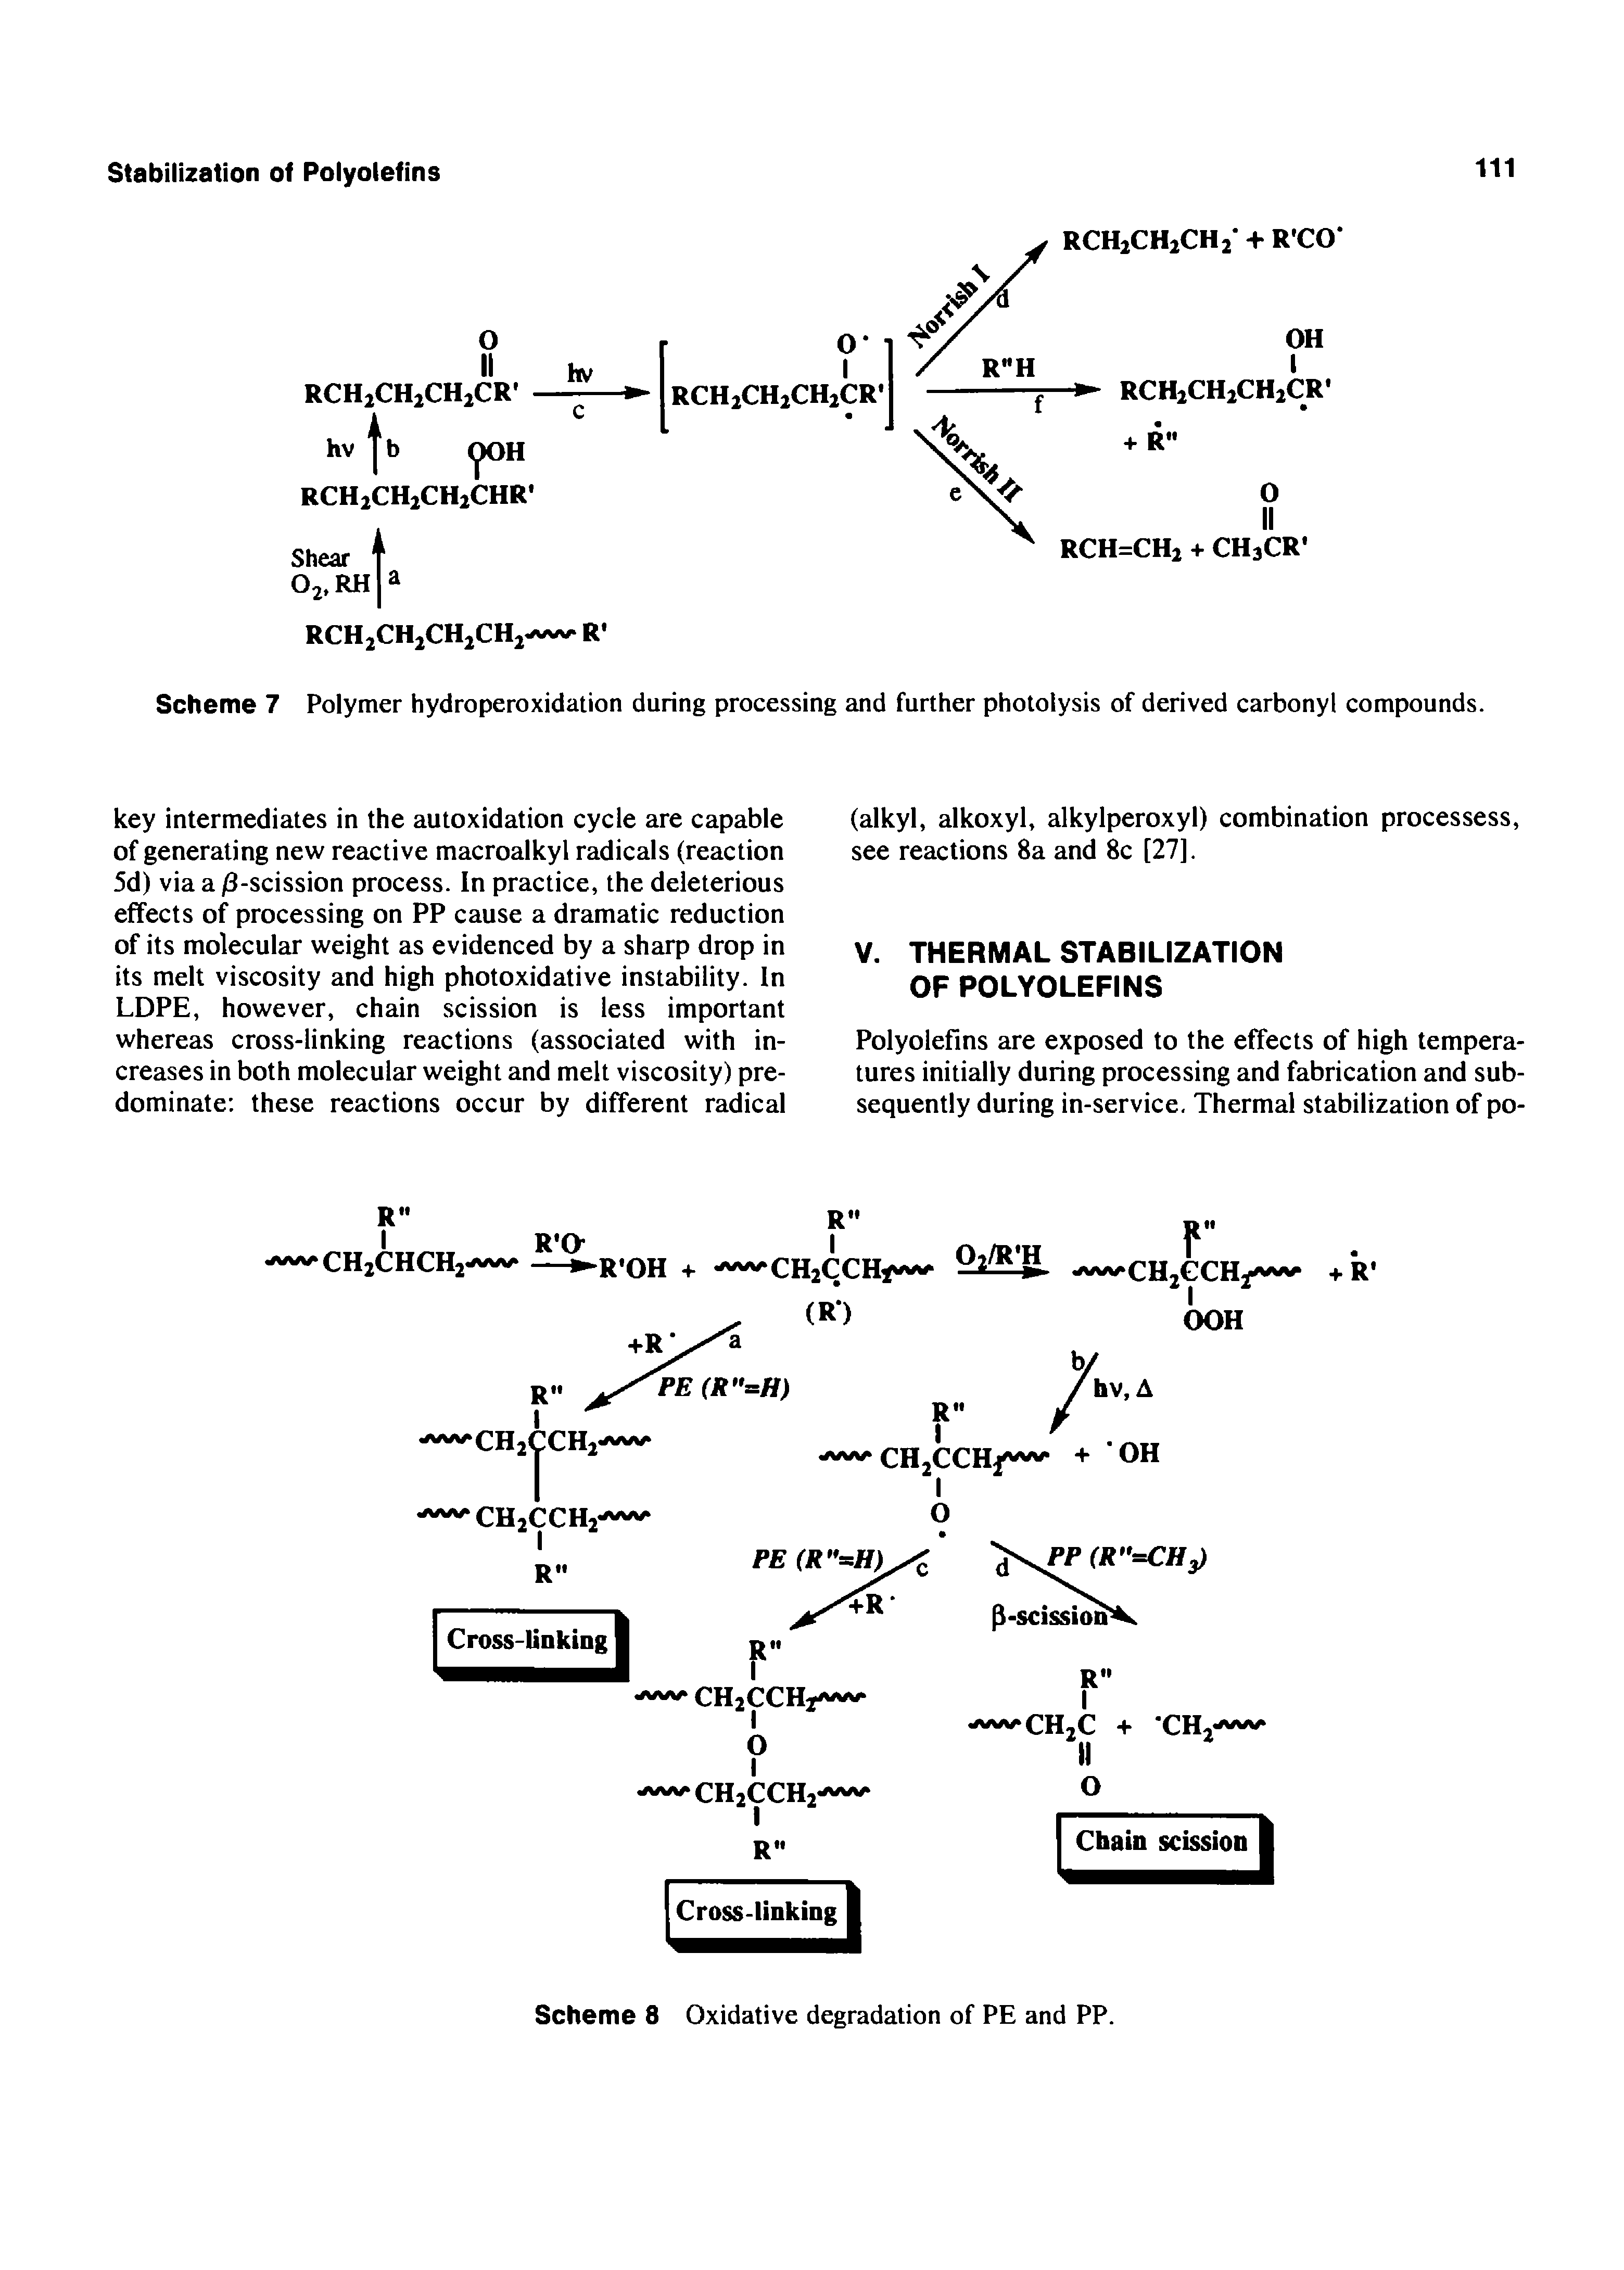 Scheme 7 Polymer hydroperoxidation during processing and further photolysis of derived carbonyl compounds.